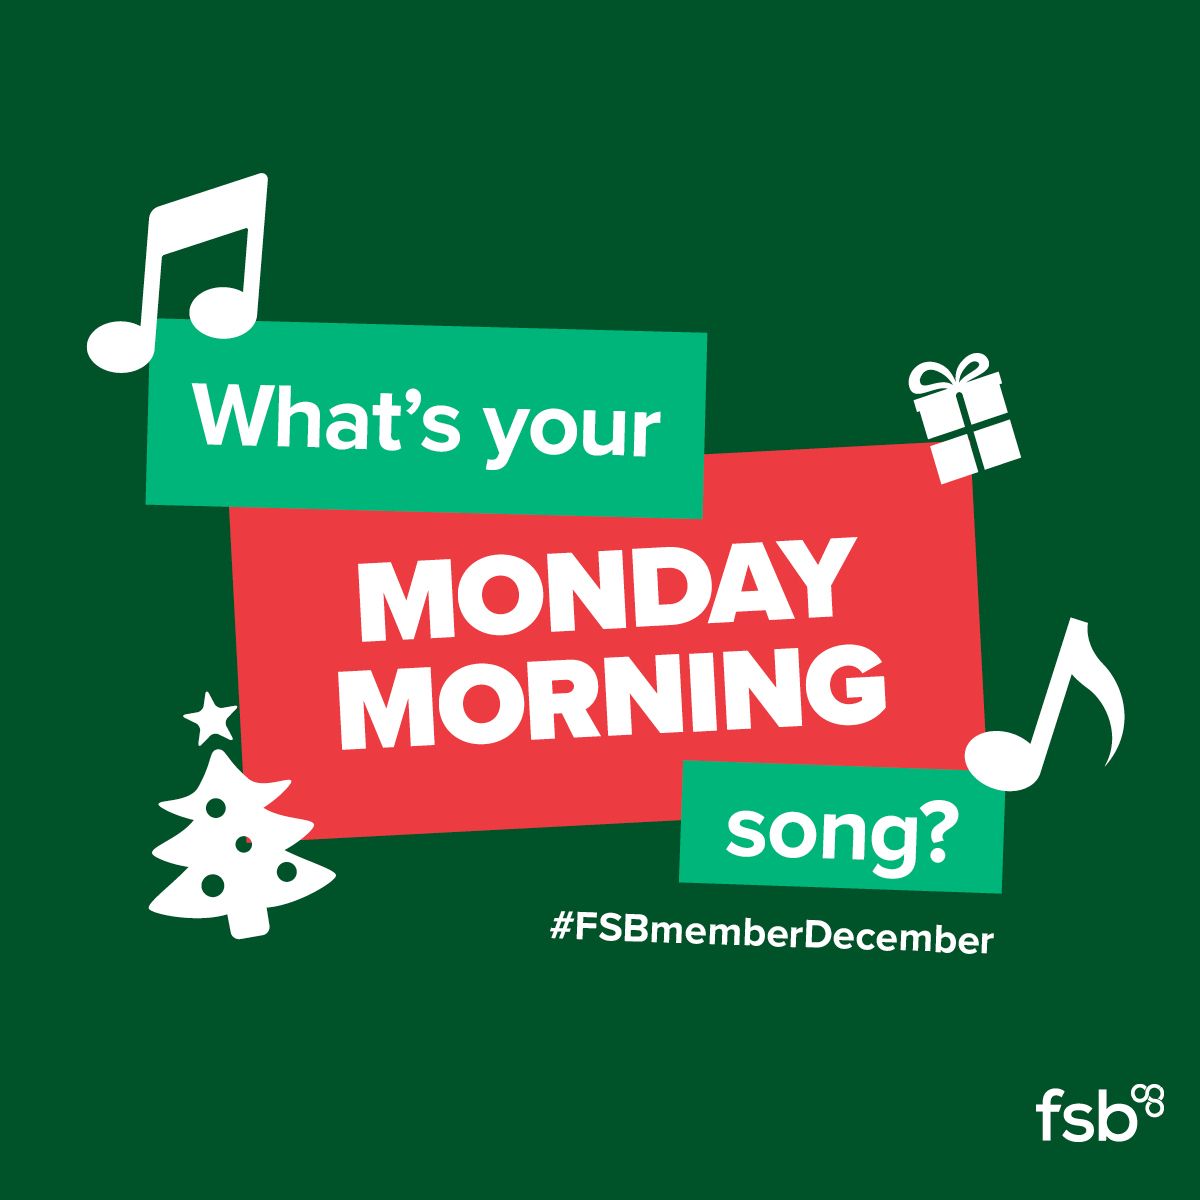 It's Monday! For a chance to win one of our amazing FSB Festive Gift Boxes, tell us in the comments below which song gets you up and raring to go on a Monday morning? 🎶 #FSBmemberDecember